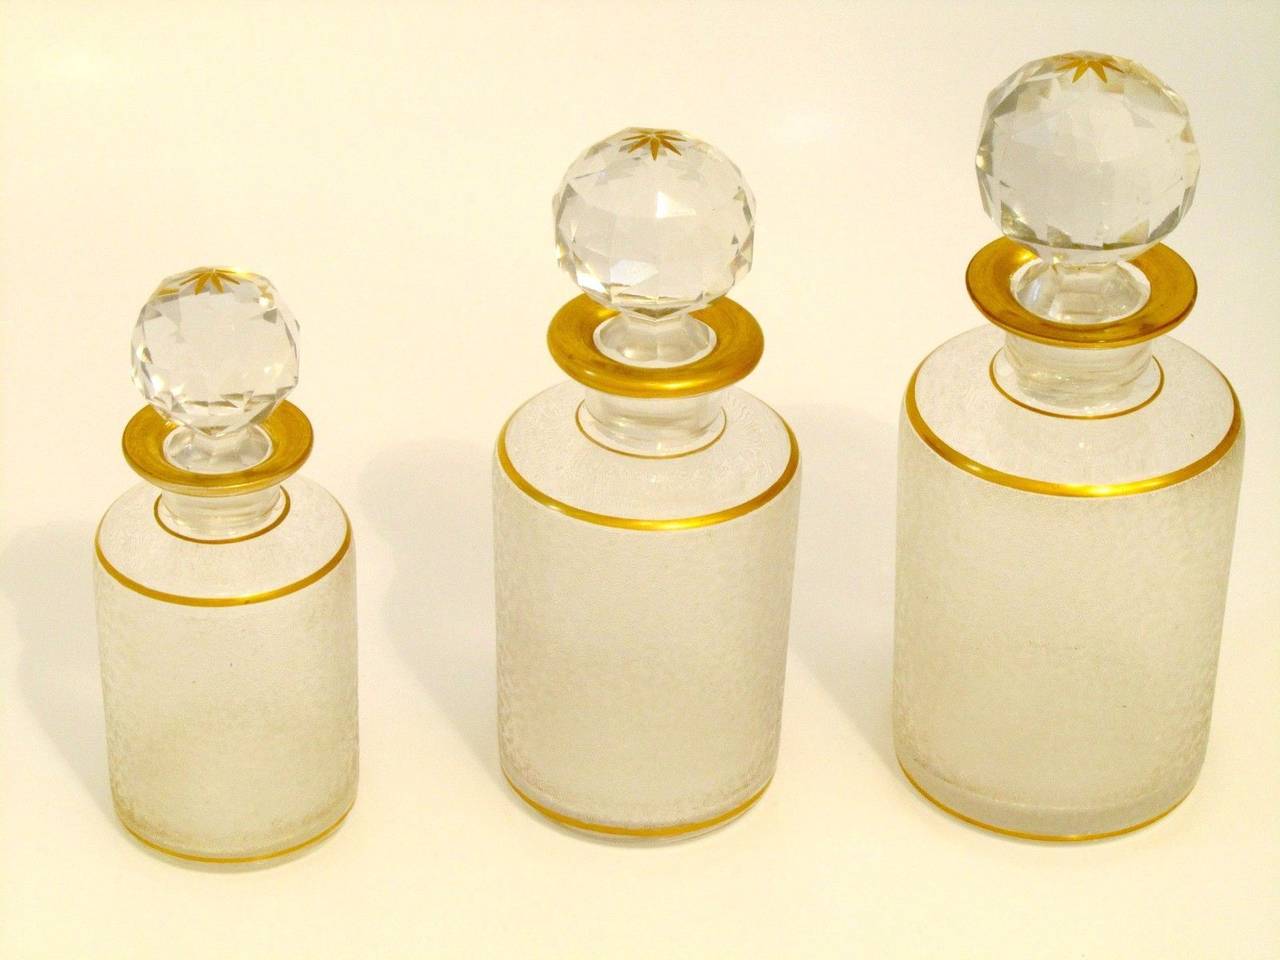 ST LOUIS Antique French Crystal Dresser / Vanity Perfume Set 4 pc

Antique French Saint Louis crystal dresser or vanity set. Comprising of three perfume bottles with gorgeous faceted stoppers, and one oval tray. Each piece is of quality hand blown